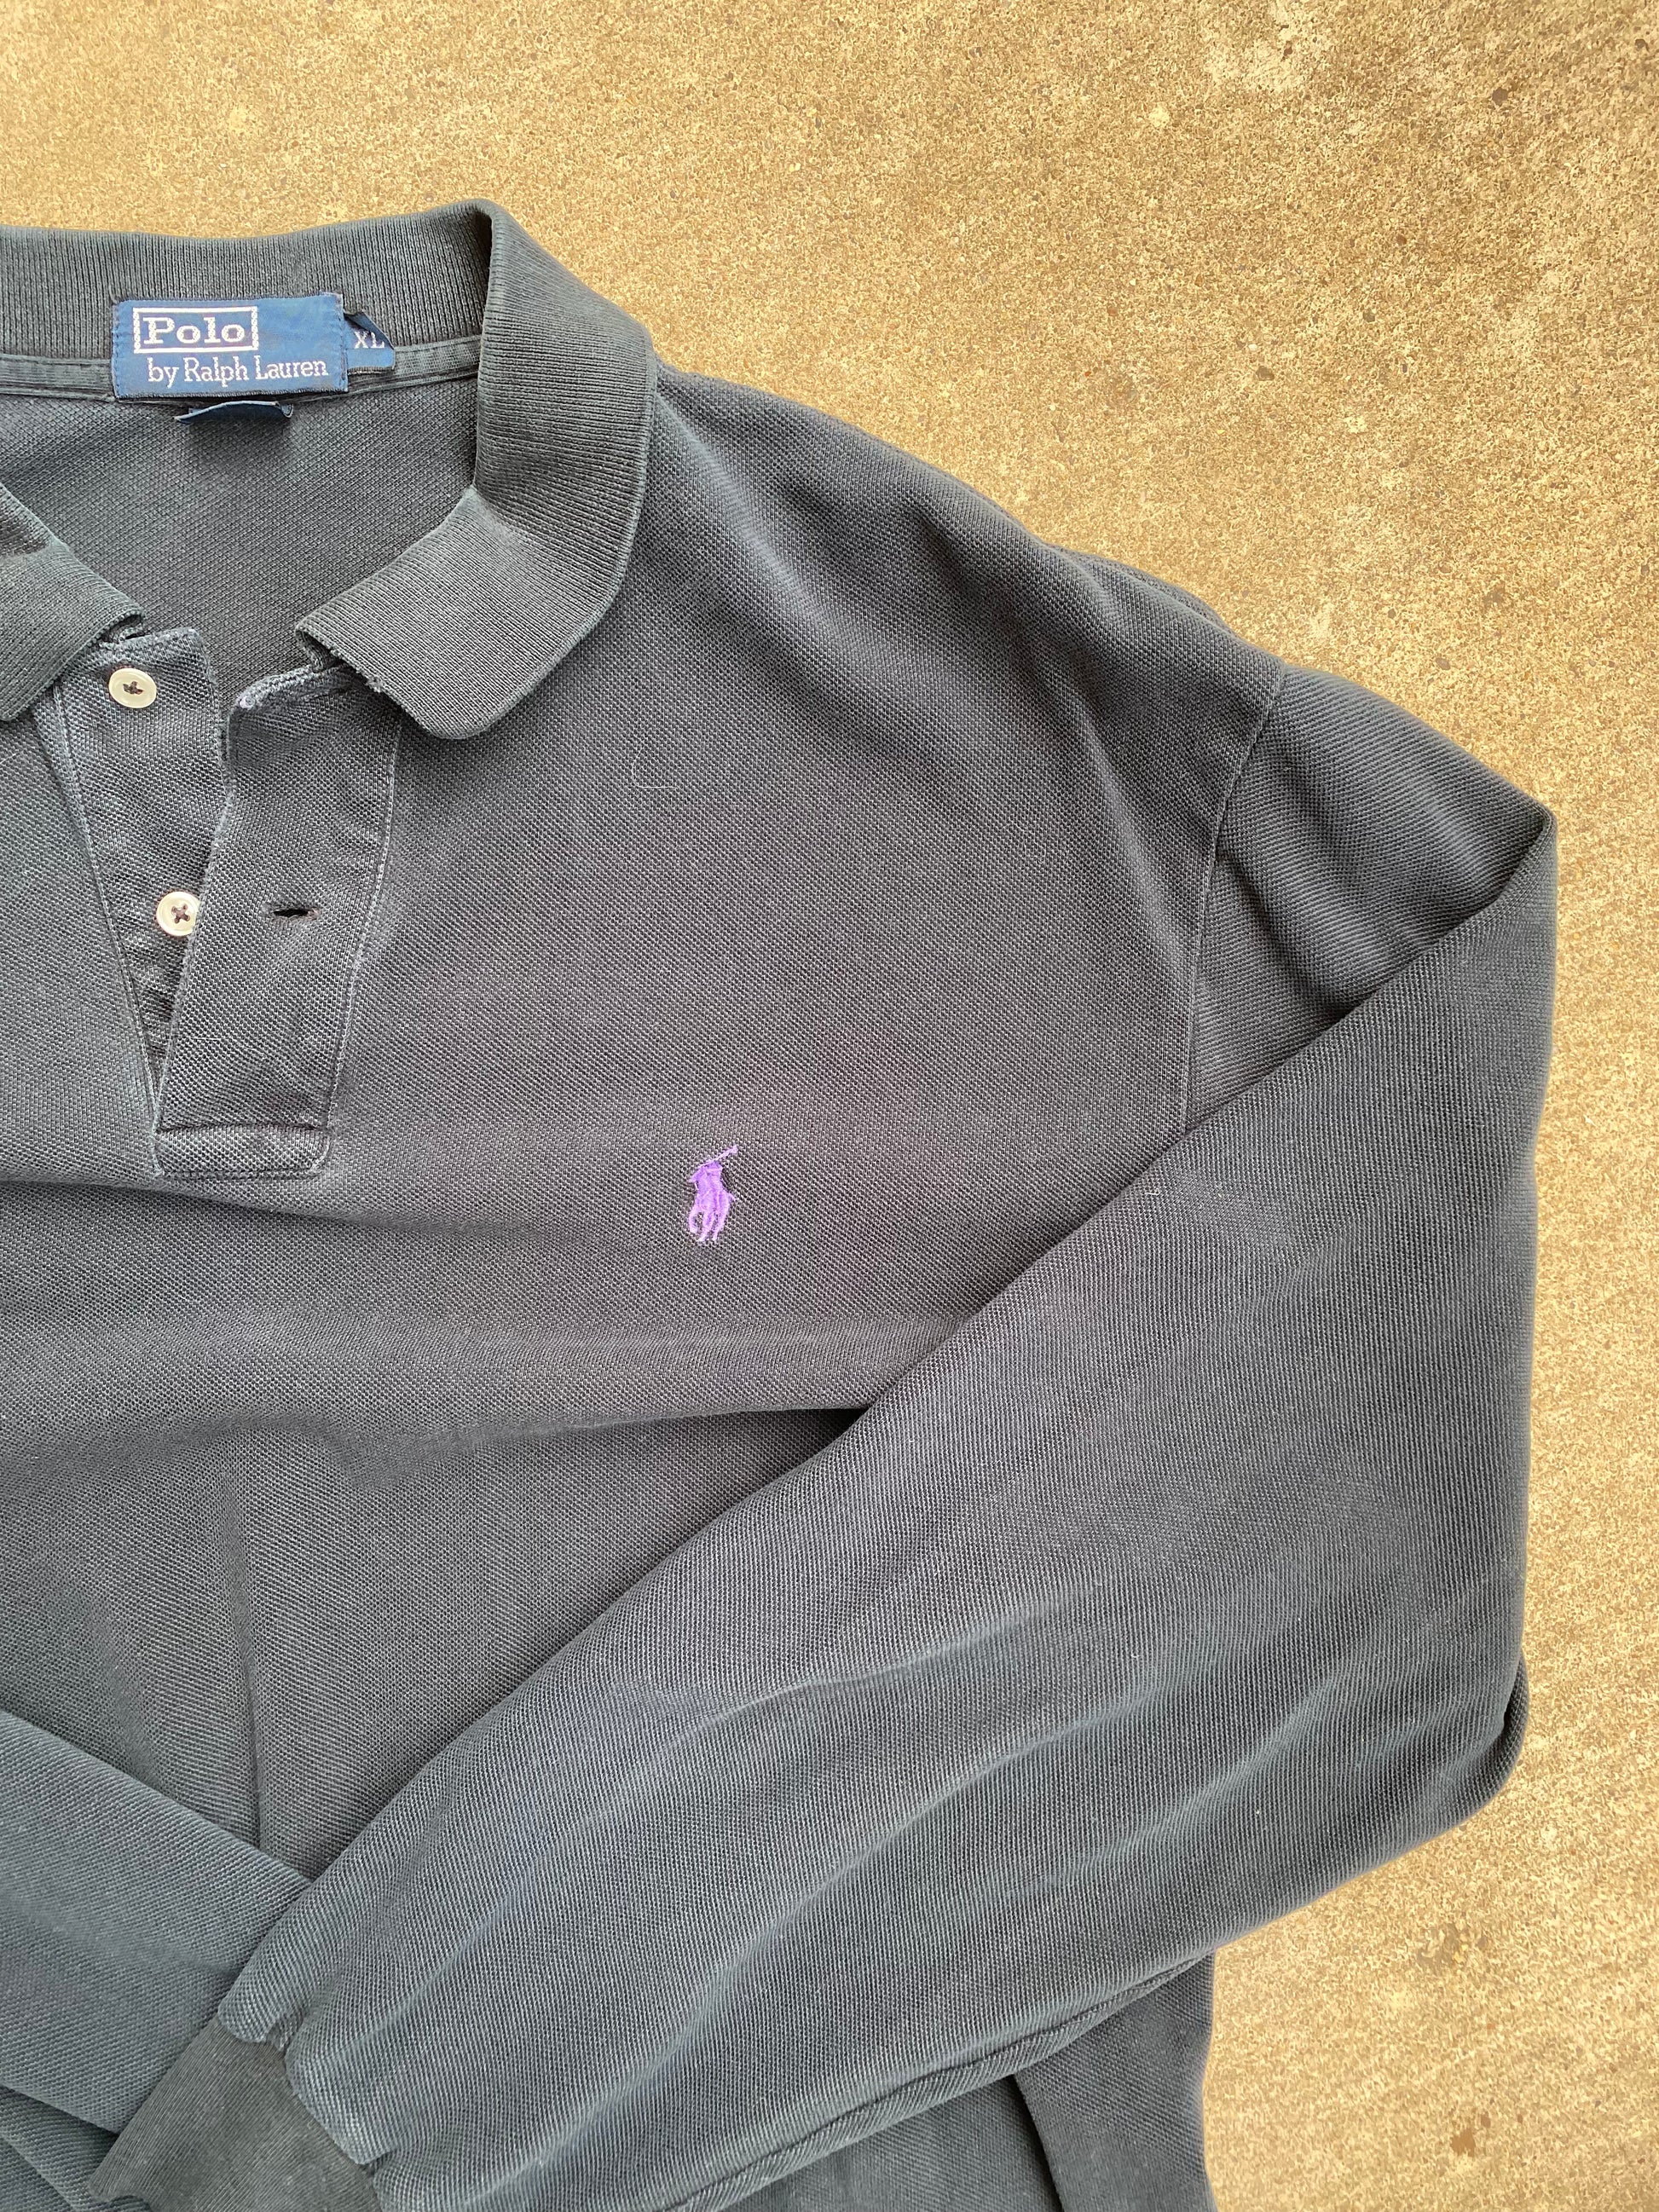 Polo Ralph Lauren Black and Purple Longsleeve Polo - Brimm Archive Wardrobe Research